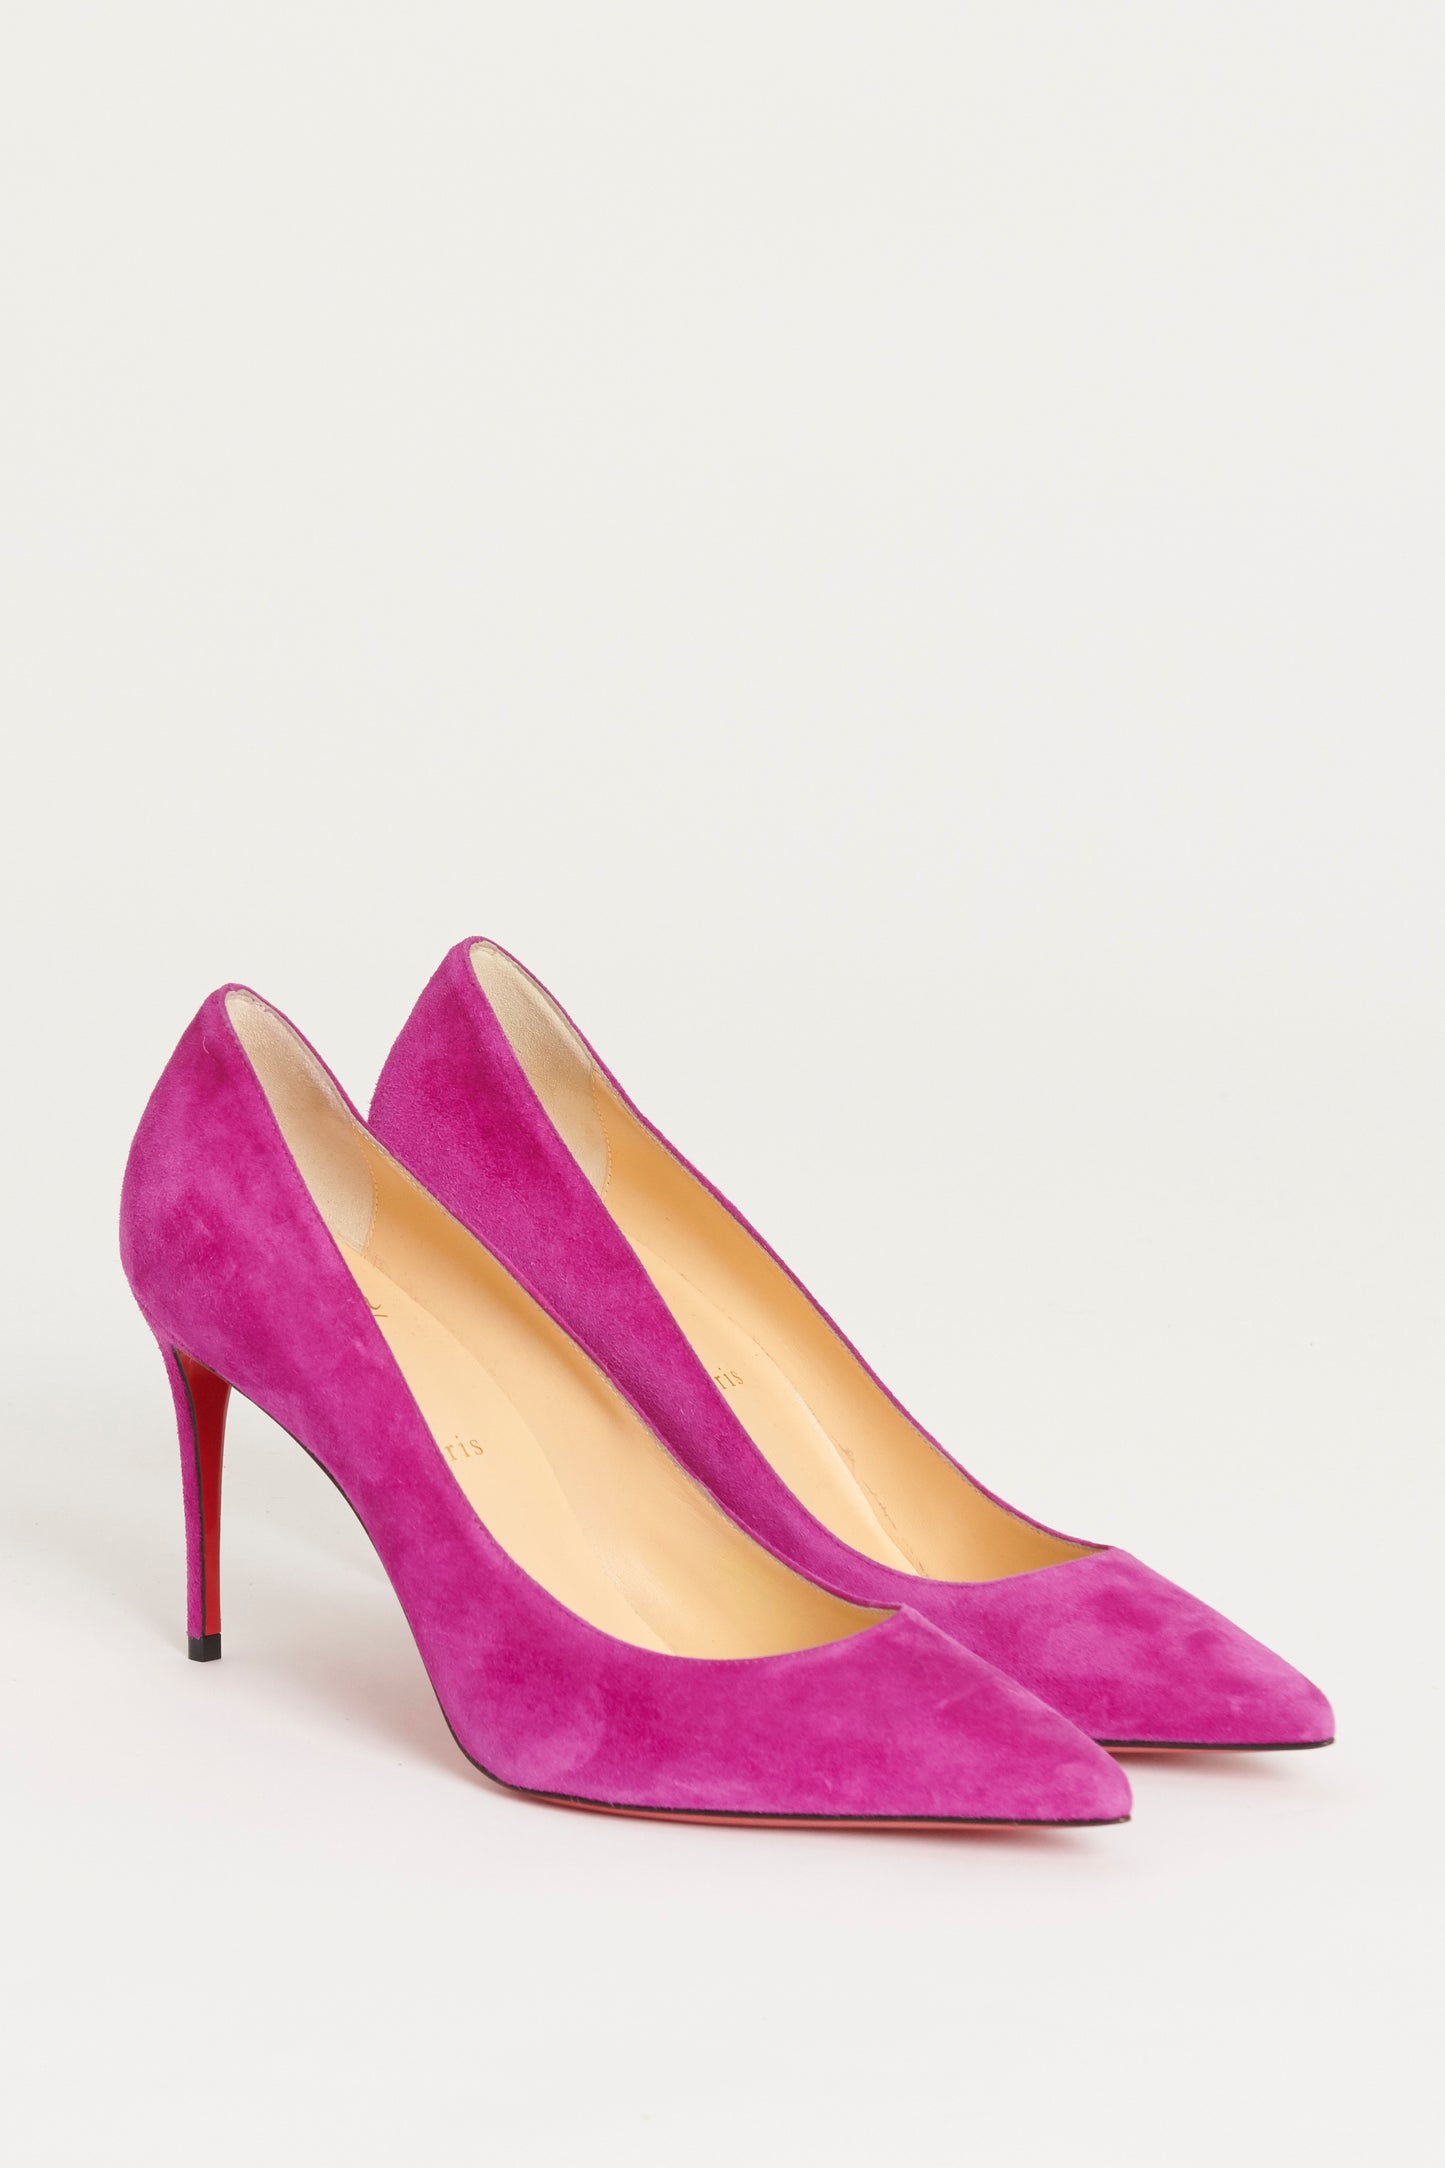 Orchid Suede Kate 85 Preowned Pumps